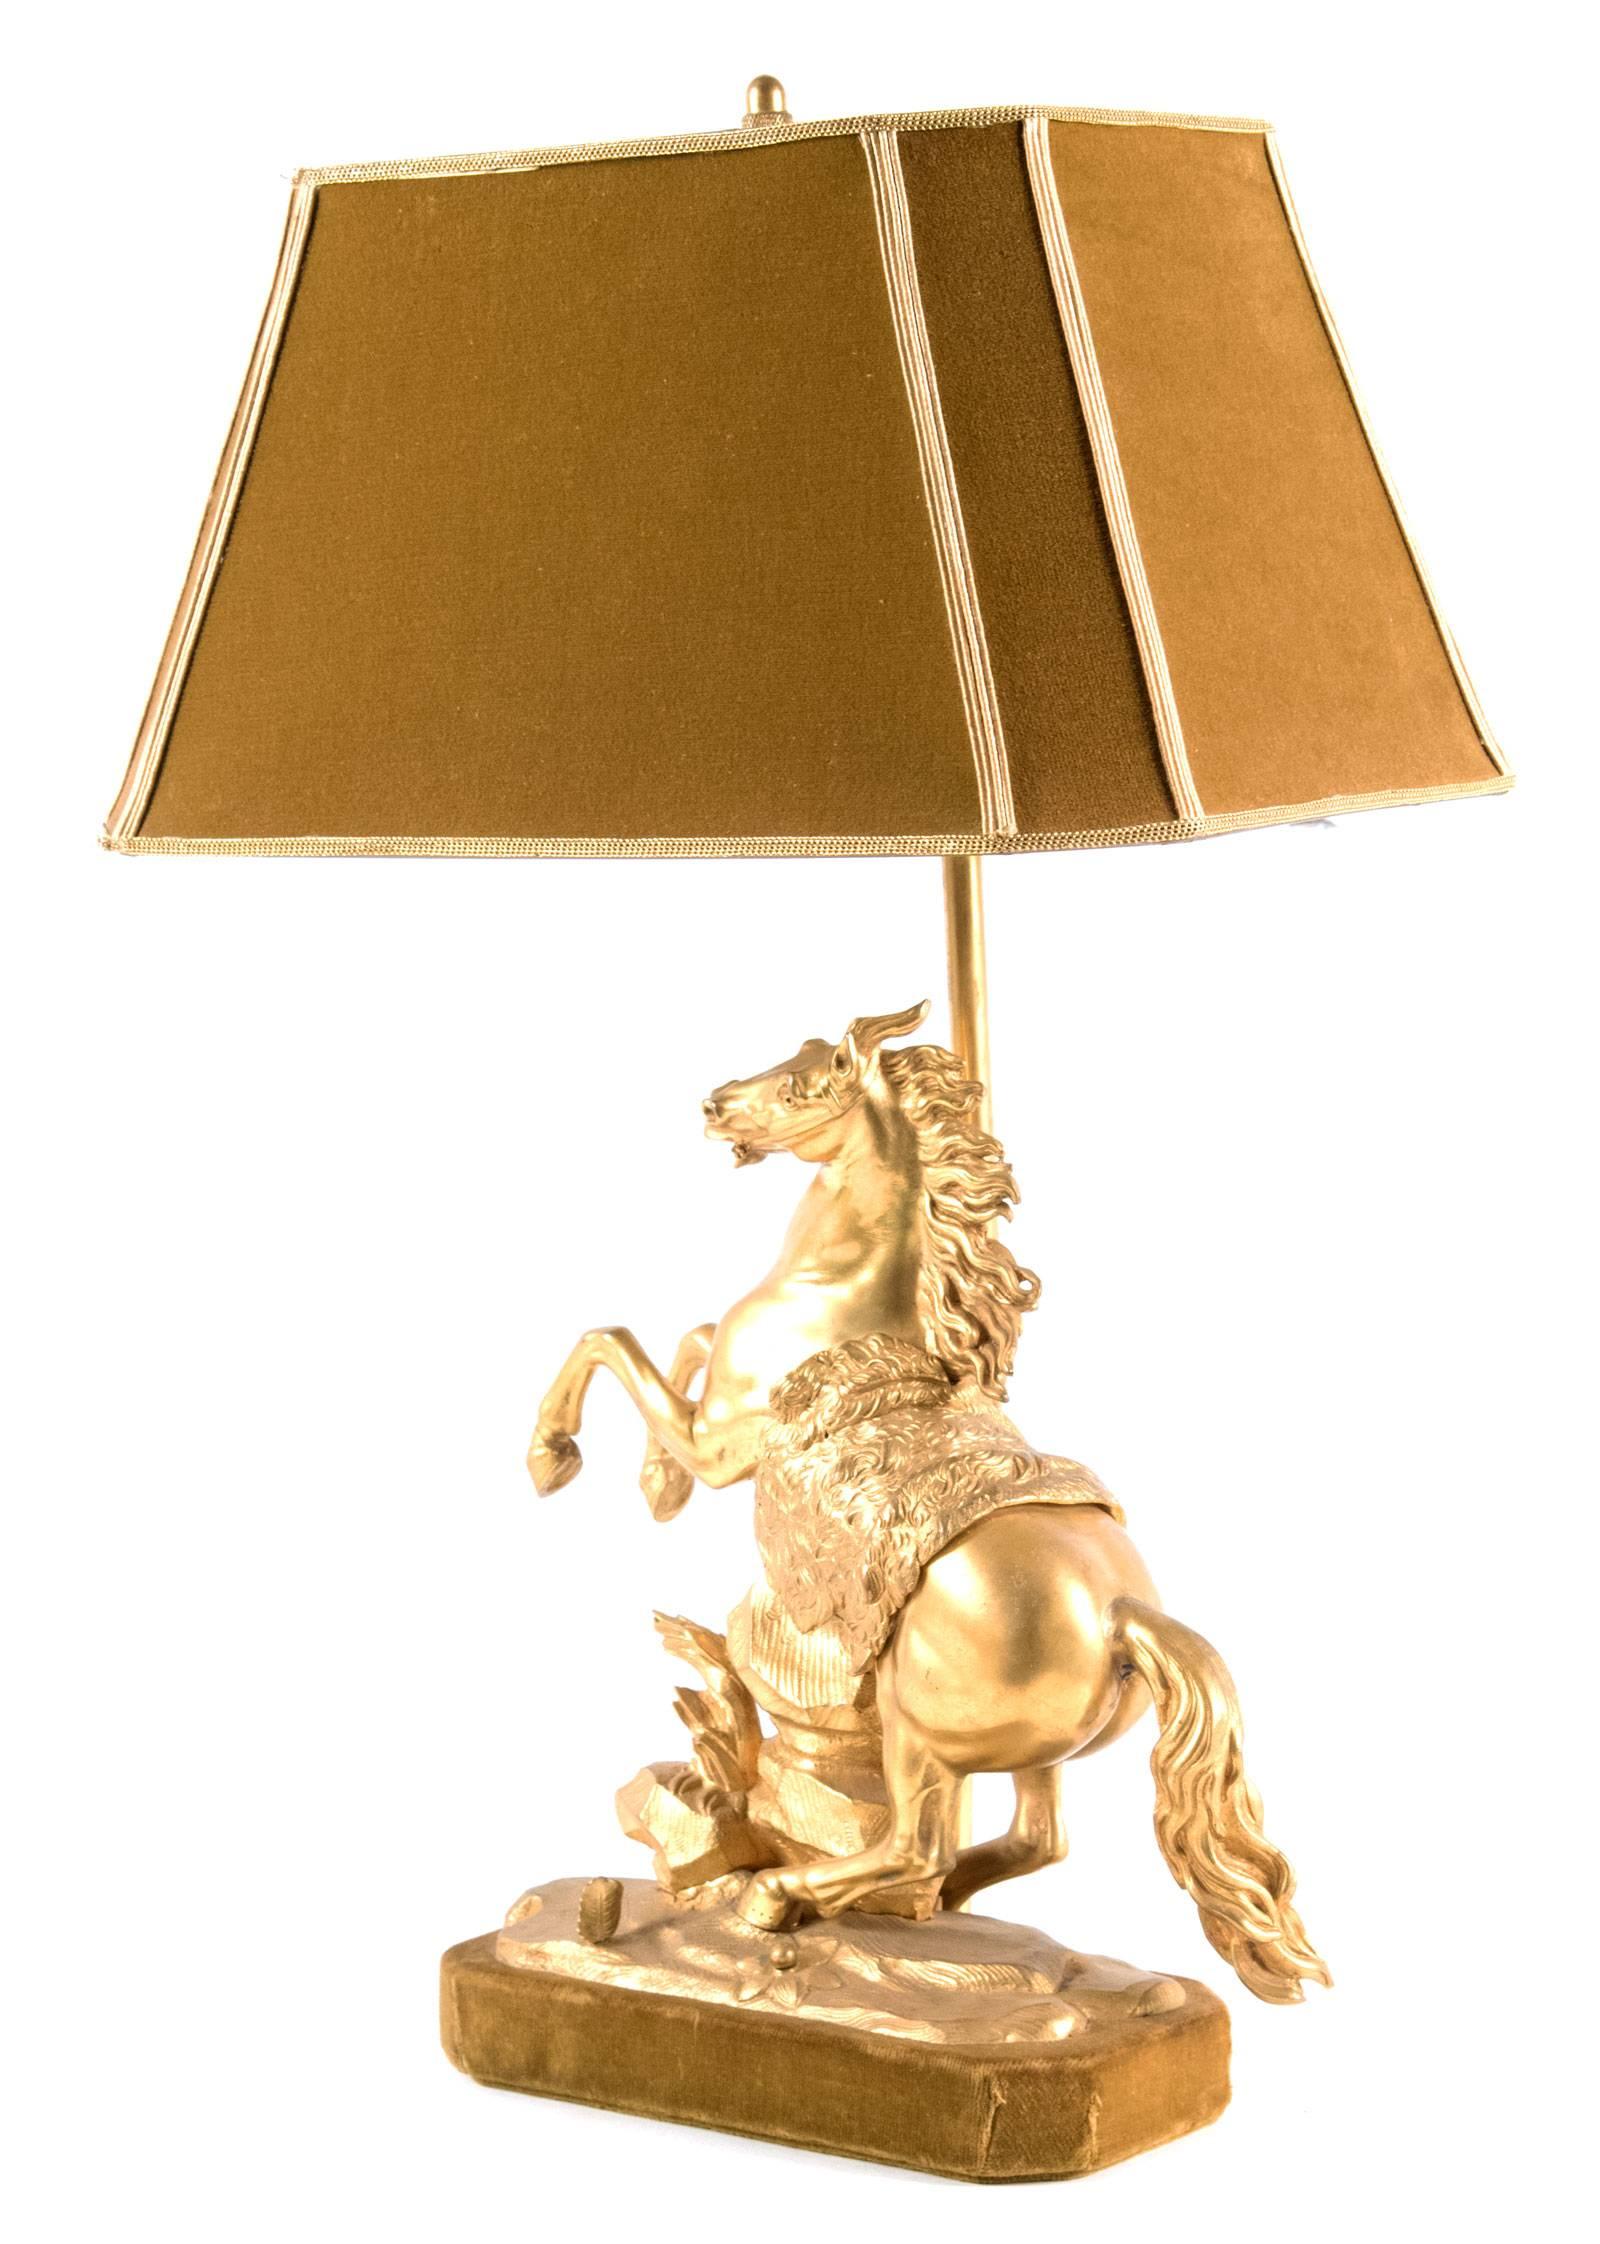 A large gilt bronze Marly horse table lamp after those created by Guillaume Coustou. The powerful creature rears on its hind legs, a wild look captured is in eyes. The details of the mane, riding blanket and naturalistic base have been finely